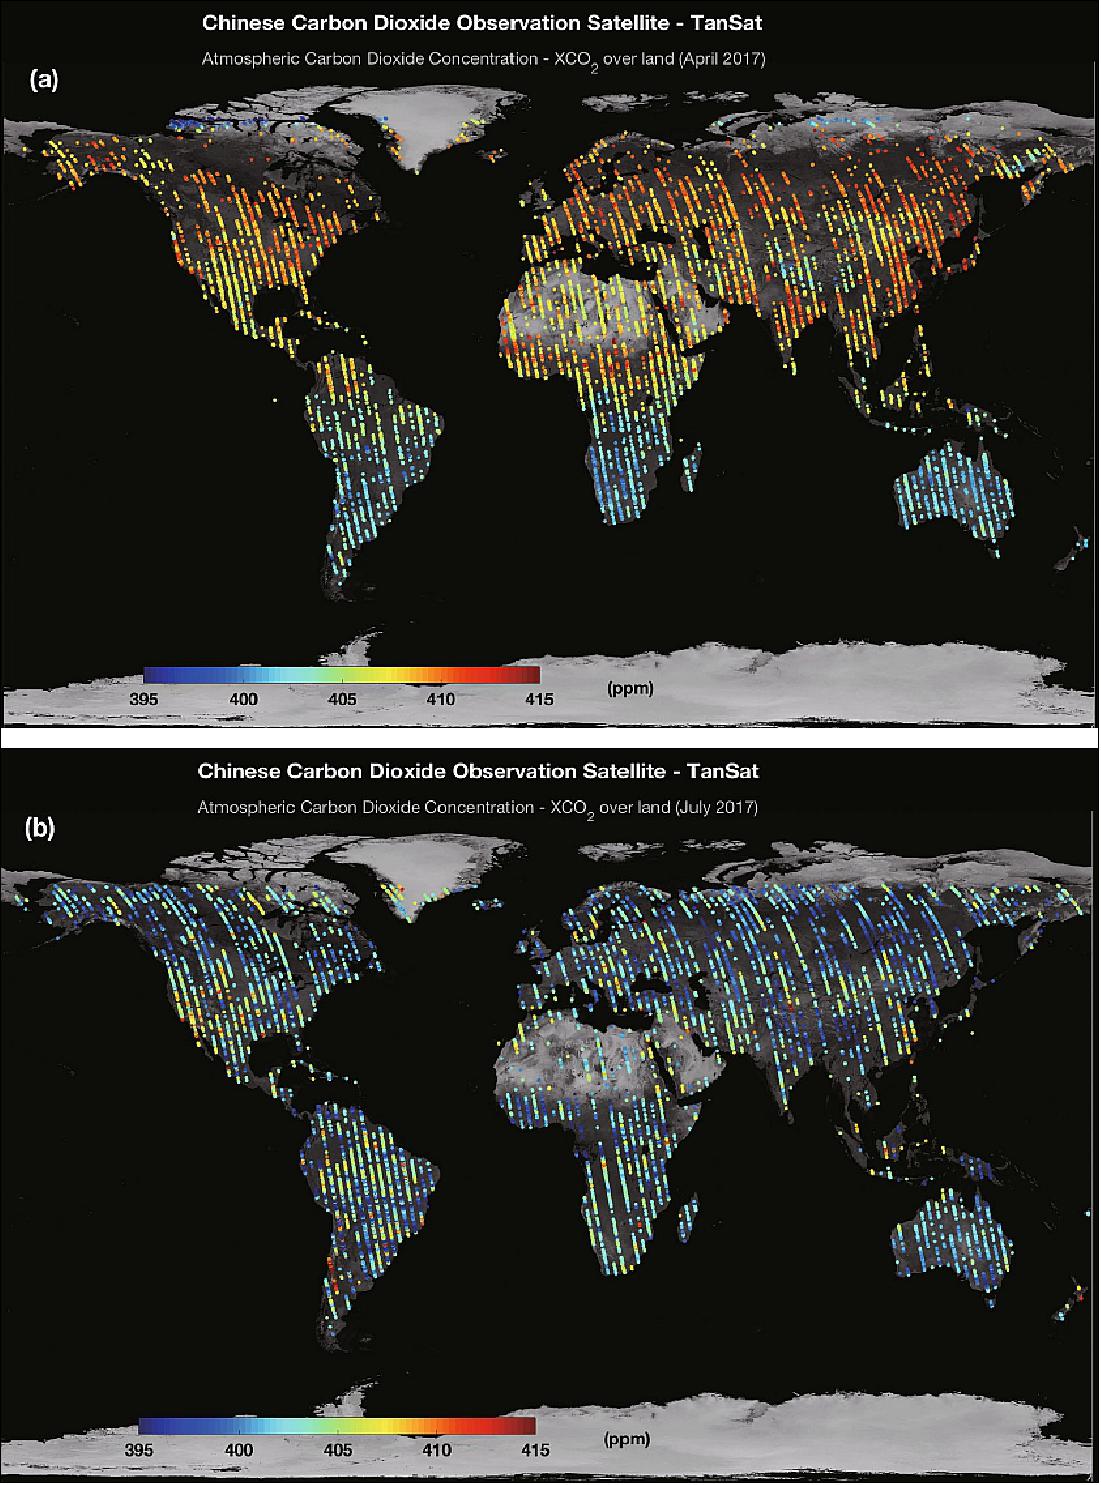 Figure 8: Global XCO2 maps produced from TanSat in nadir mode in (a) April and (b) July 2017. The colored marks indicate the XCO2 values and the color scale bar is shown at the bottom of each figure (image credit: TanSat Team)